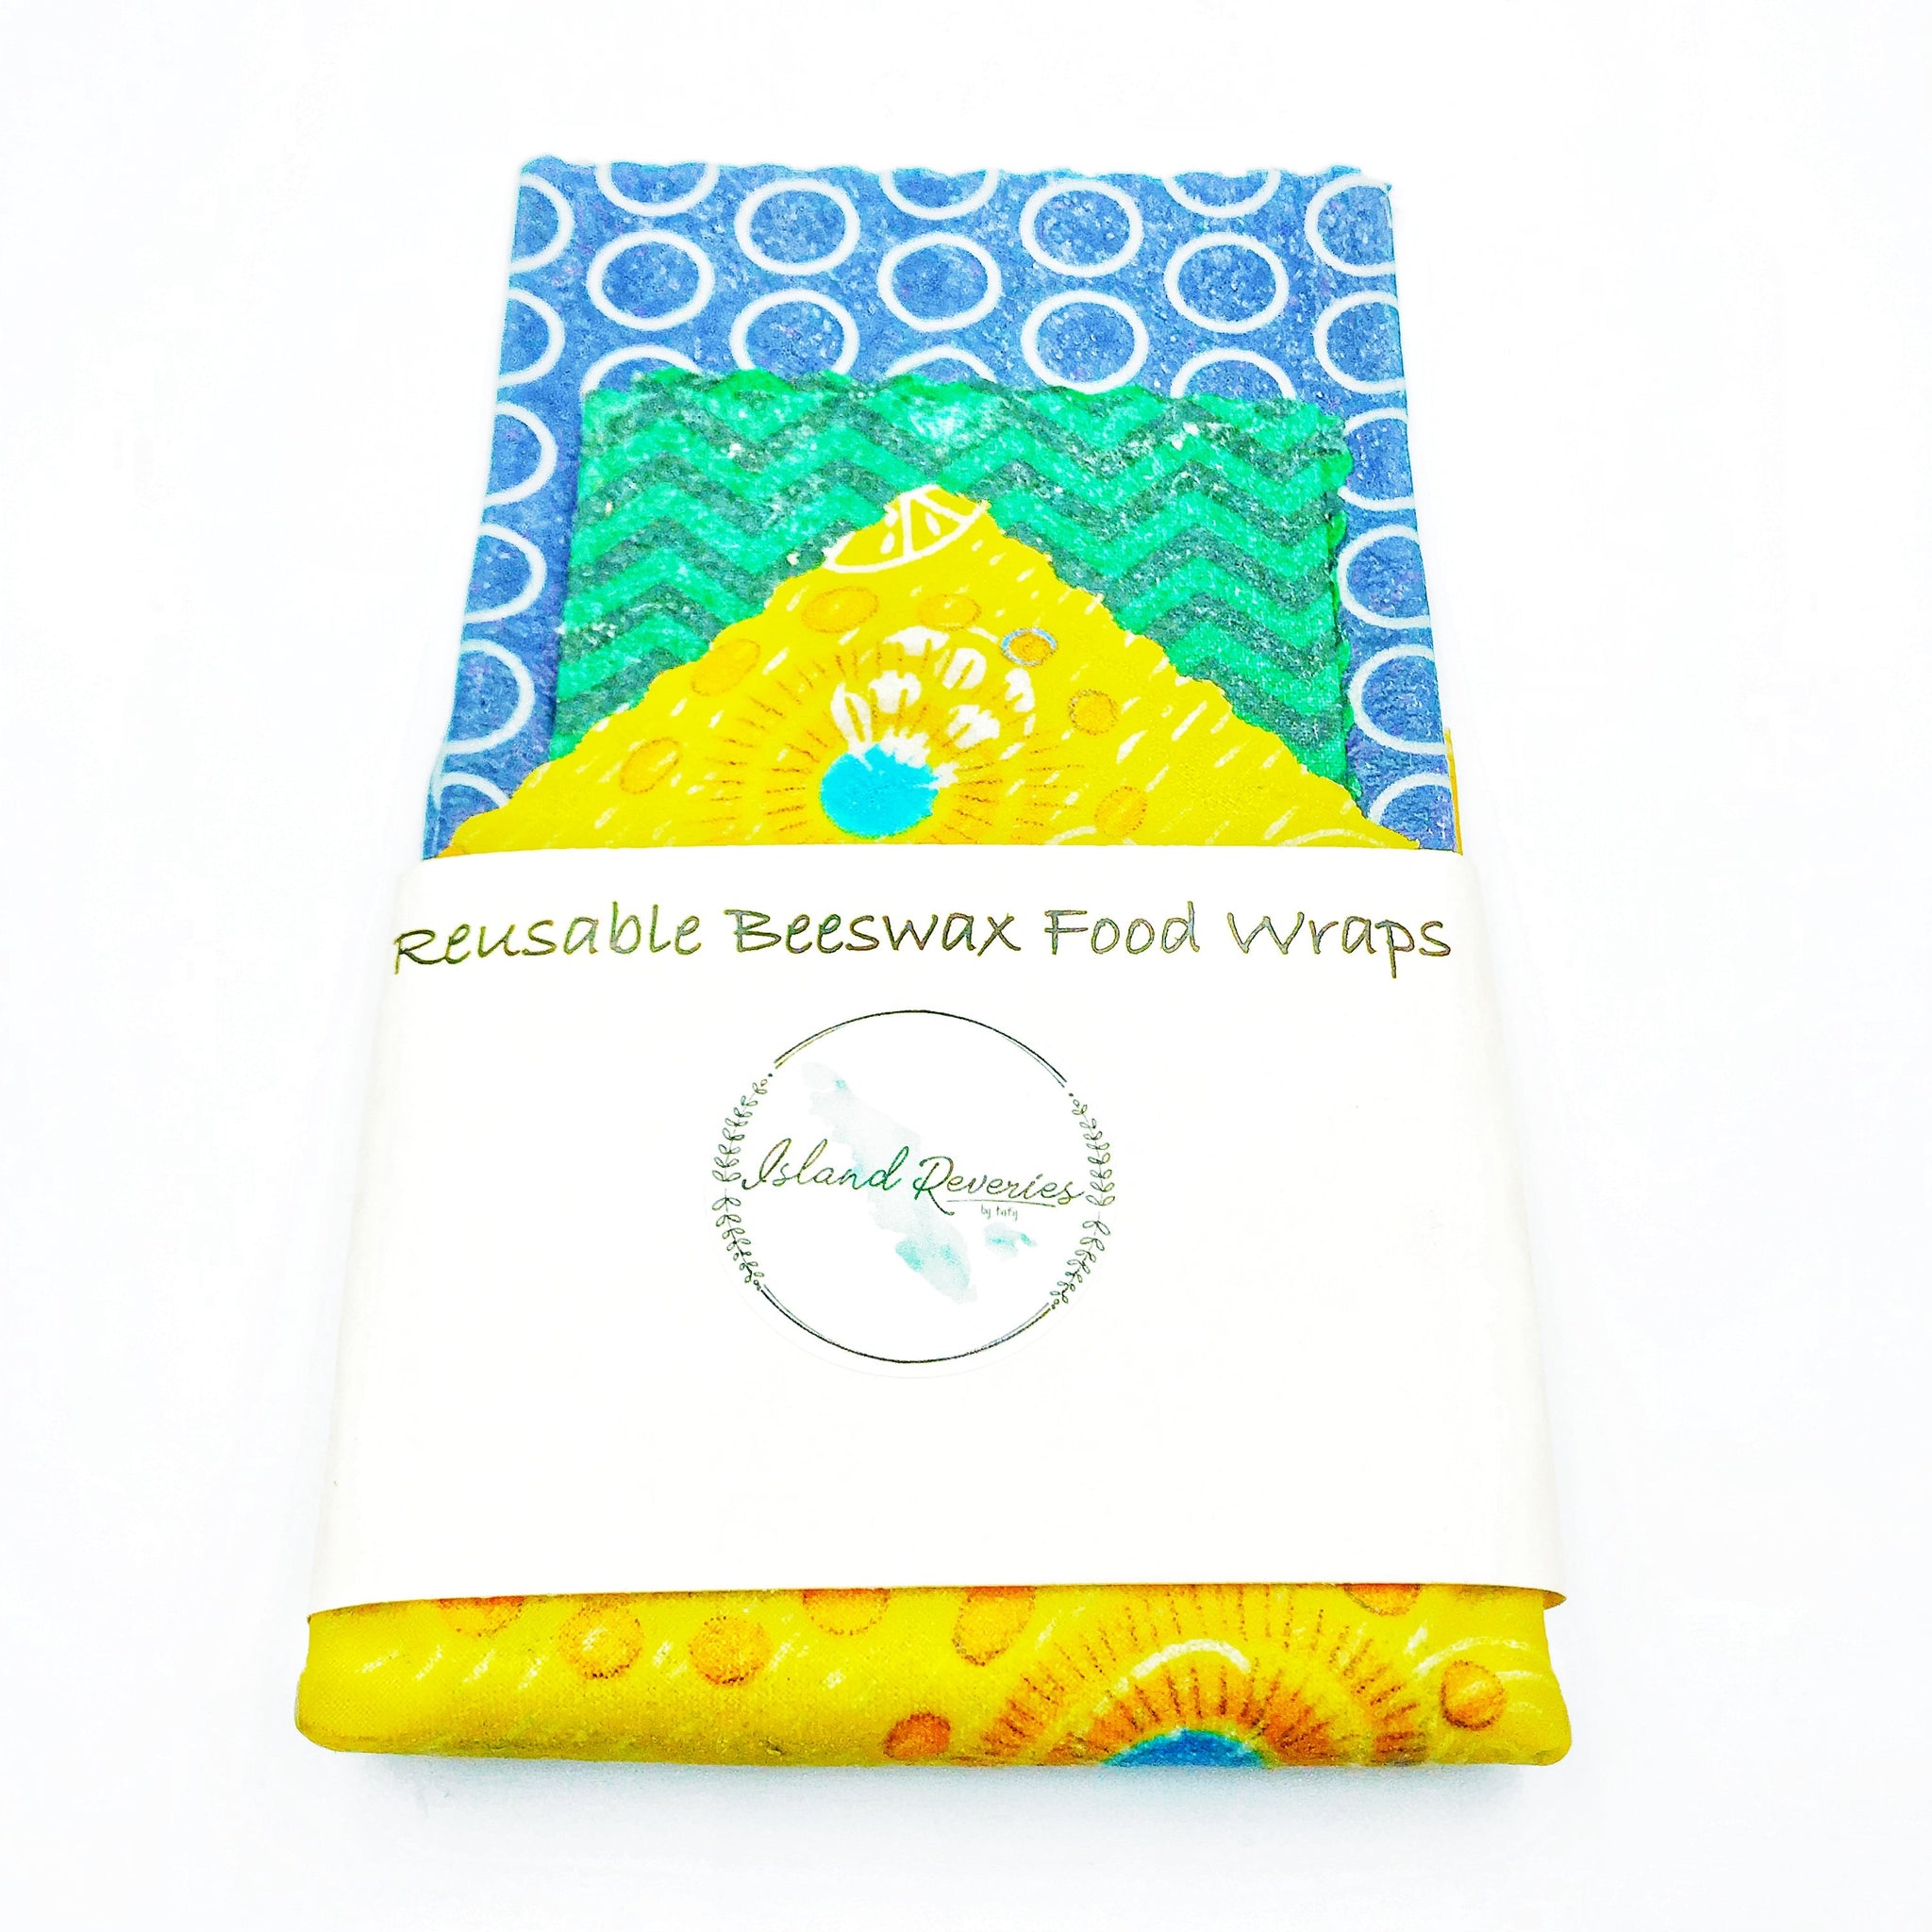 Island Reveries Reusable Beeswax Food Wraps, Blue, Green, Yellow